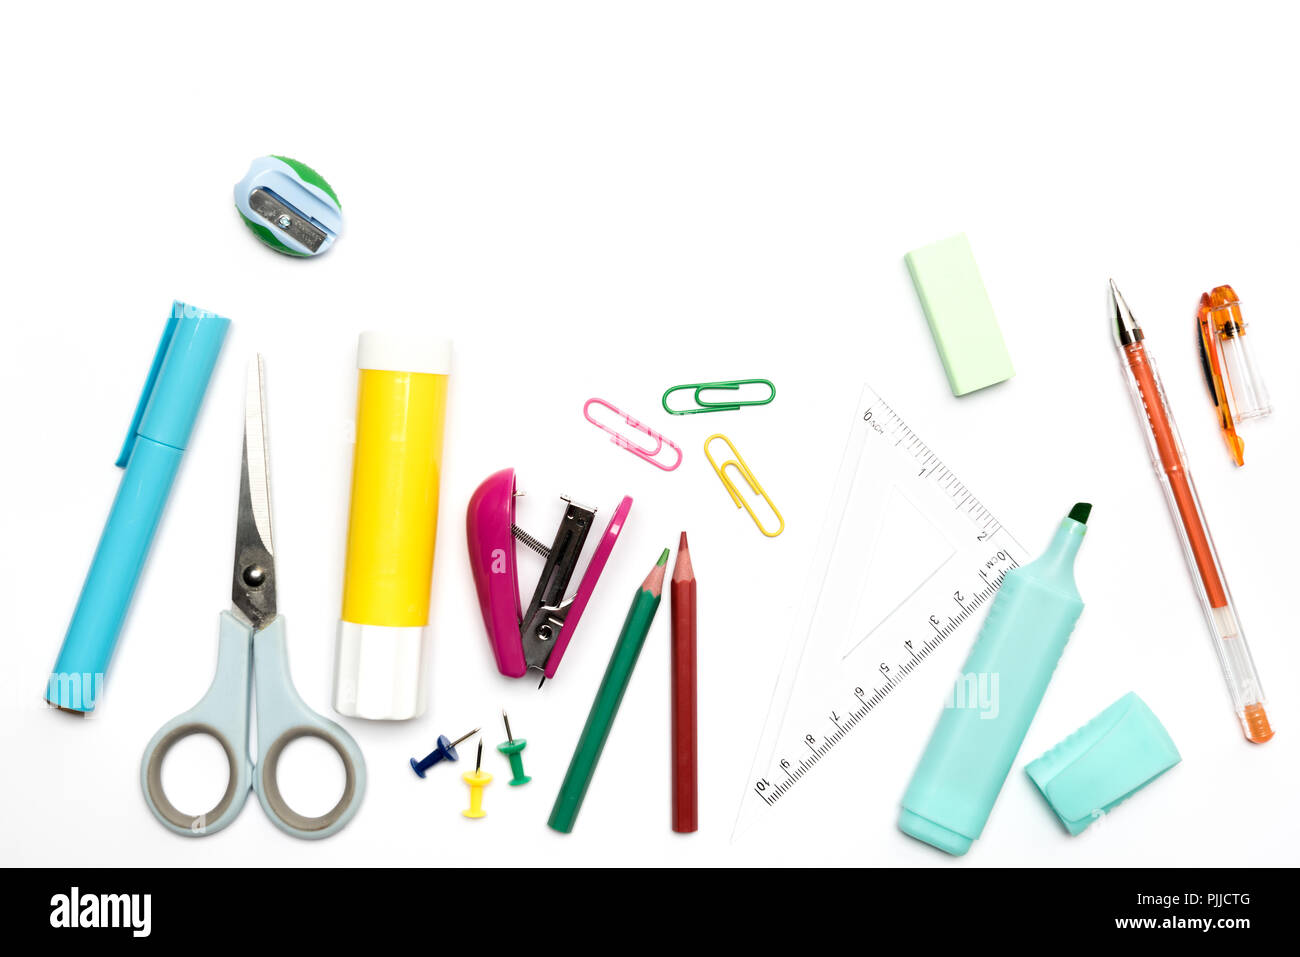 School and office stationery items randomly arranged on white background including pencil, pen, scissors Stock Photo